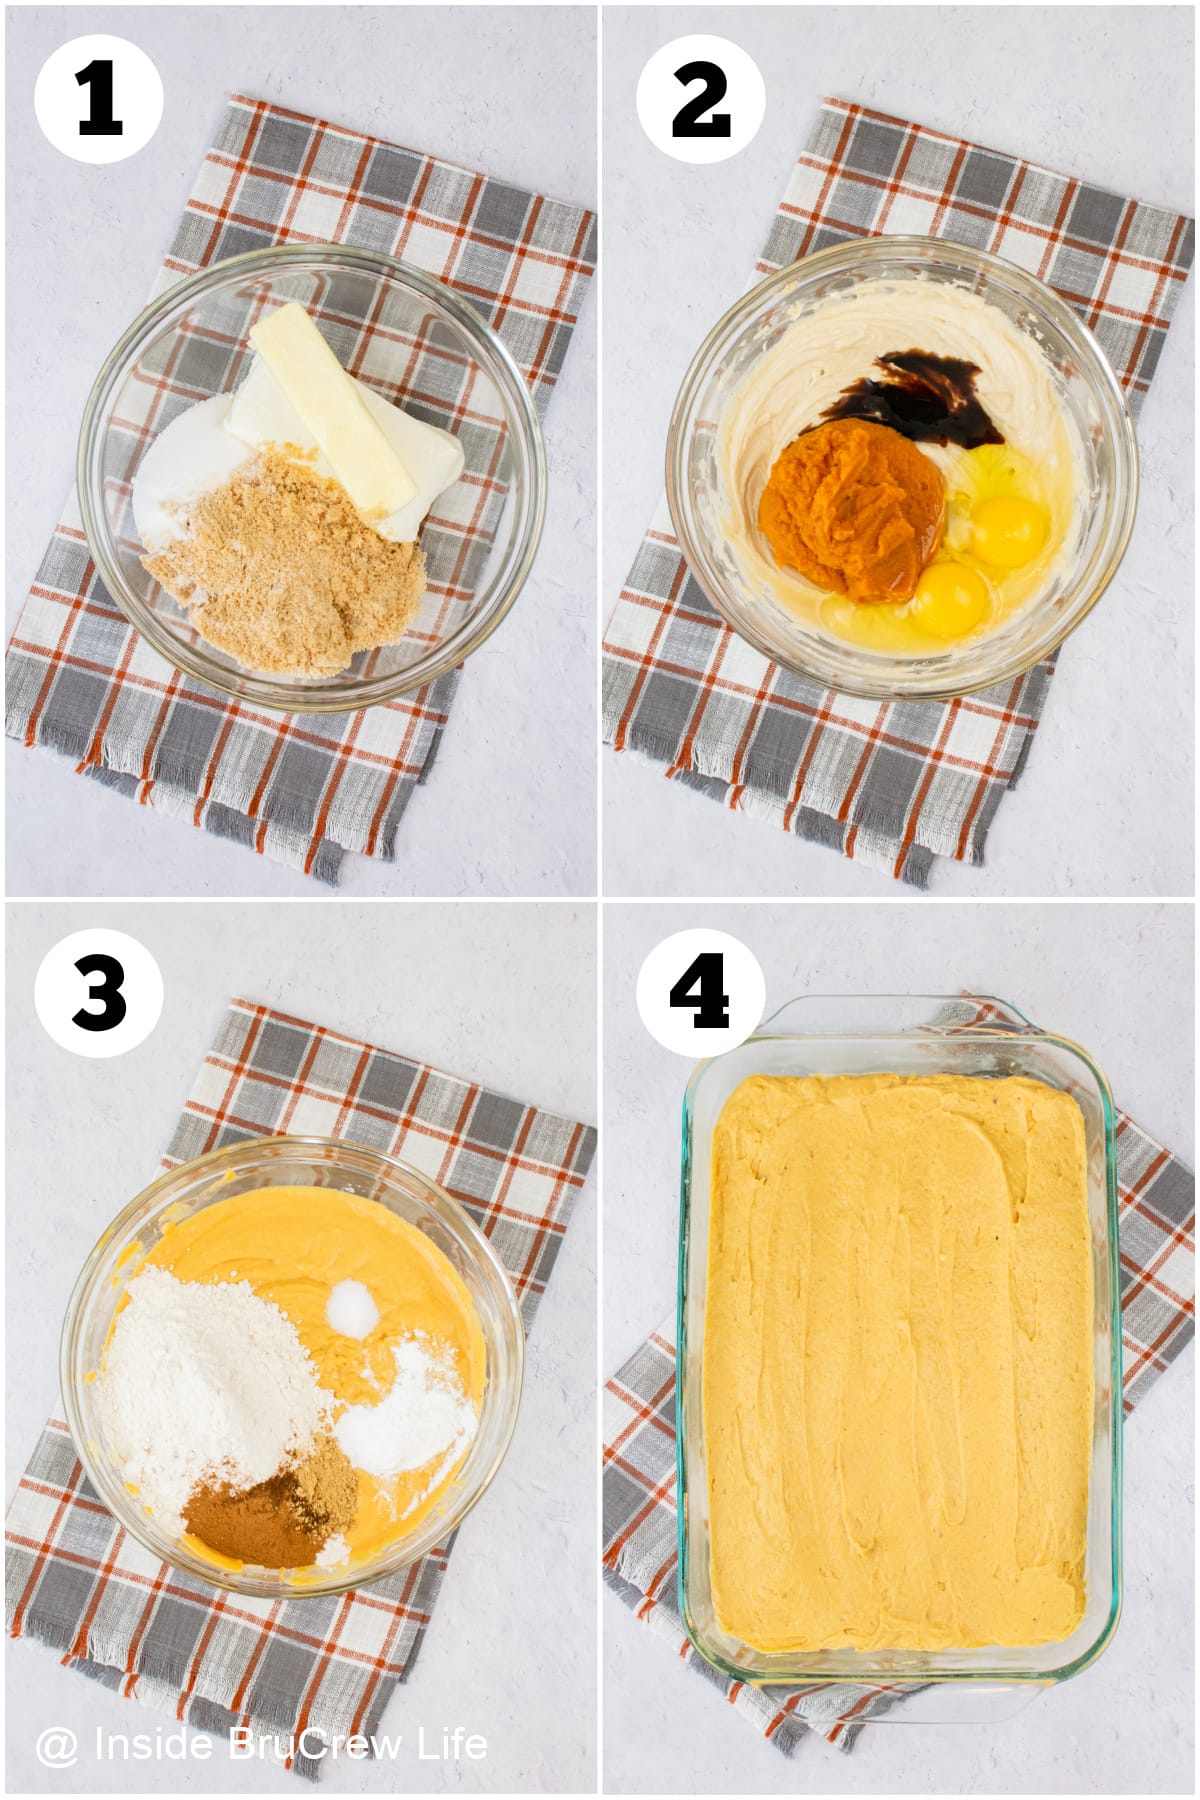 Four pictures collaged together showing how to make pumpkin coffee cake batter.